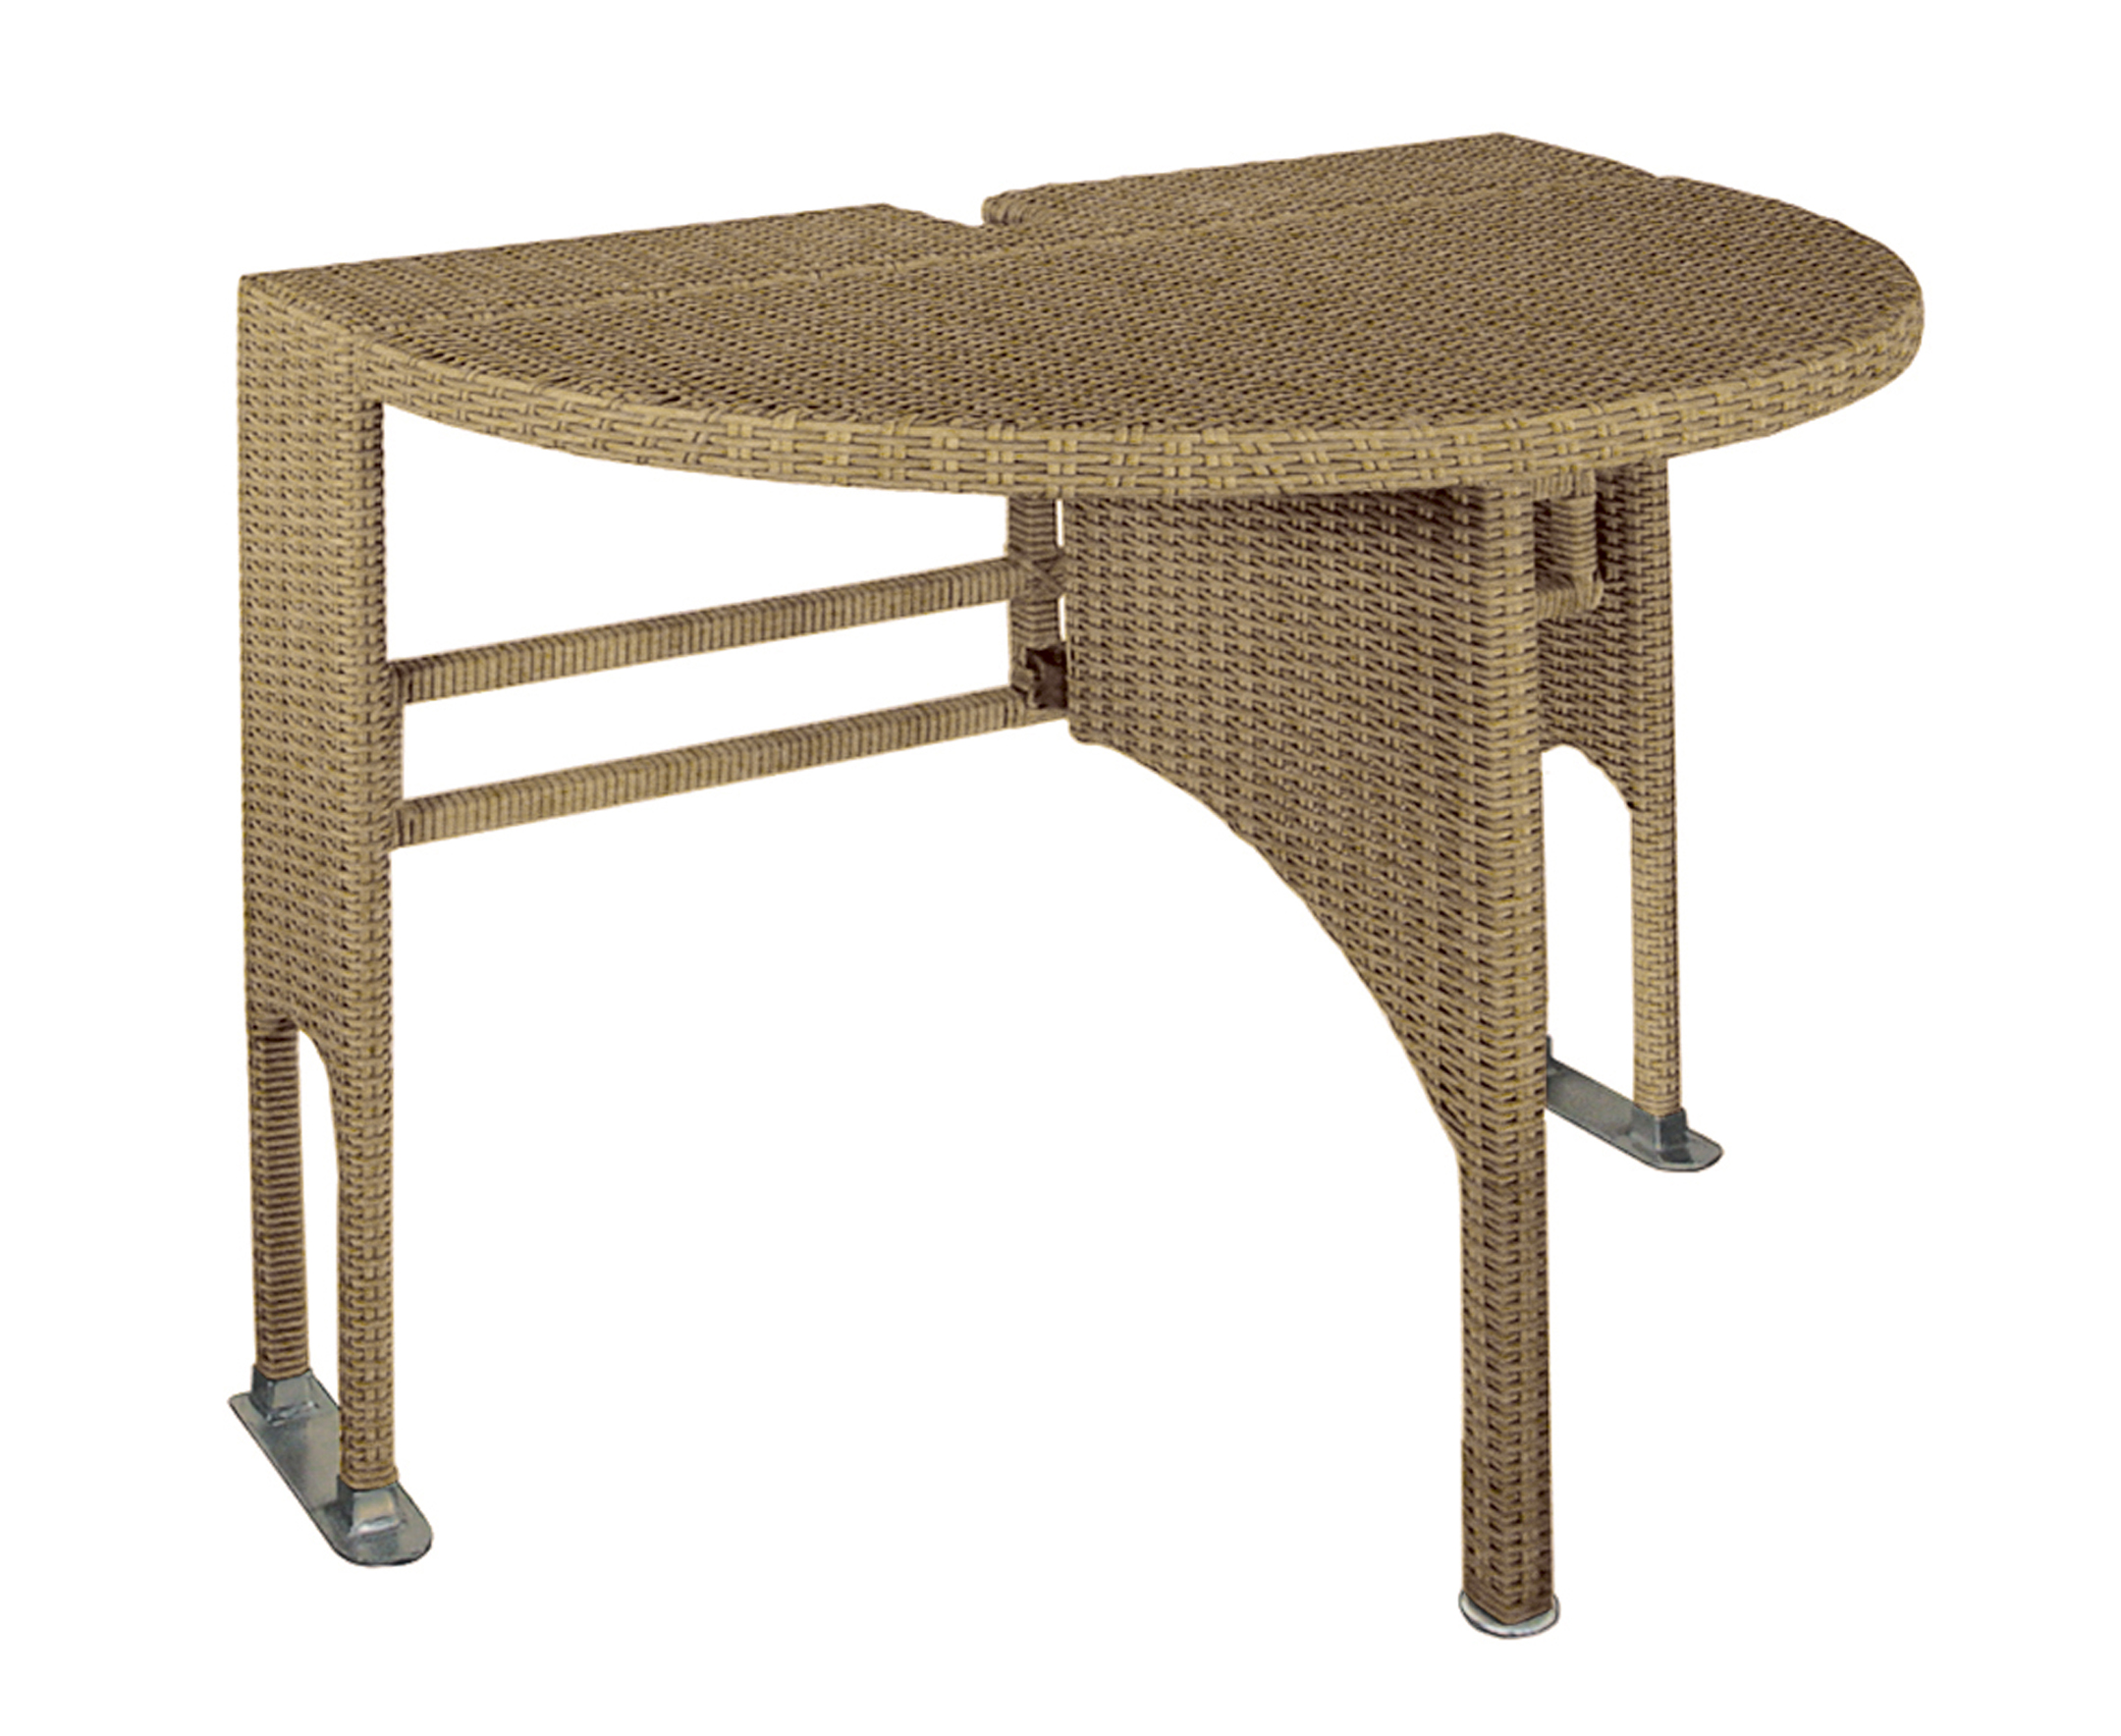 Blue Star Group Terrace Mates Adena All-Weather Wicker Coffee Color Table Set w/ 9'-Wide OFF-THE-WALL BRELLA - Green SolarVista Canopy - image 4 of 7